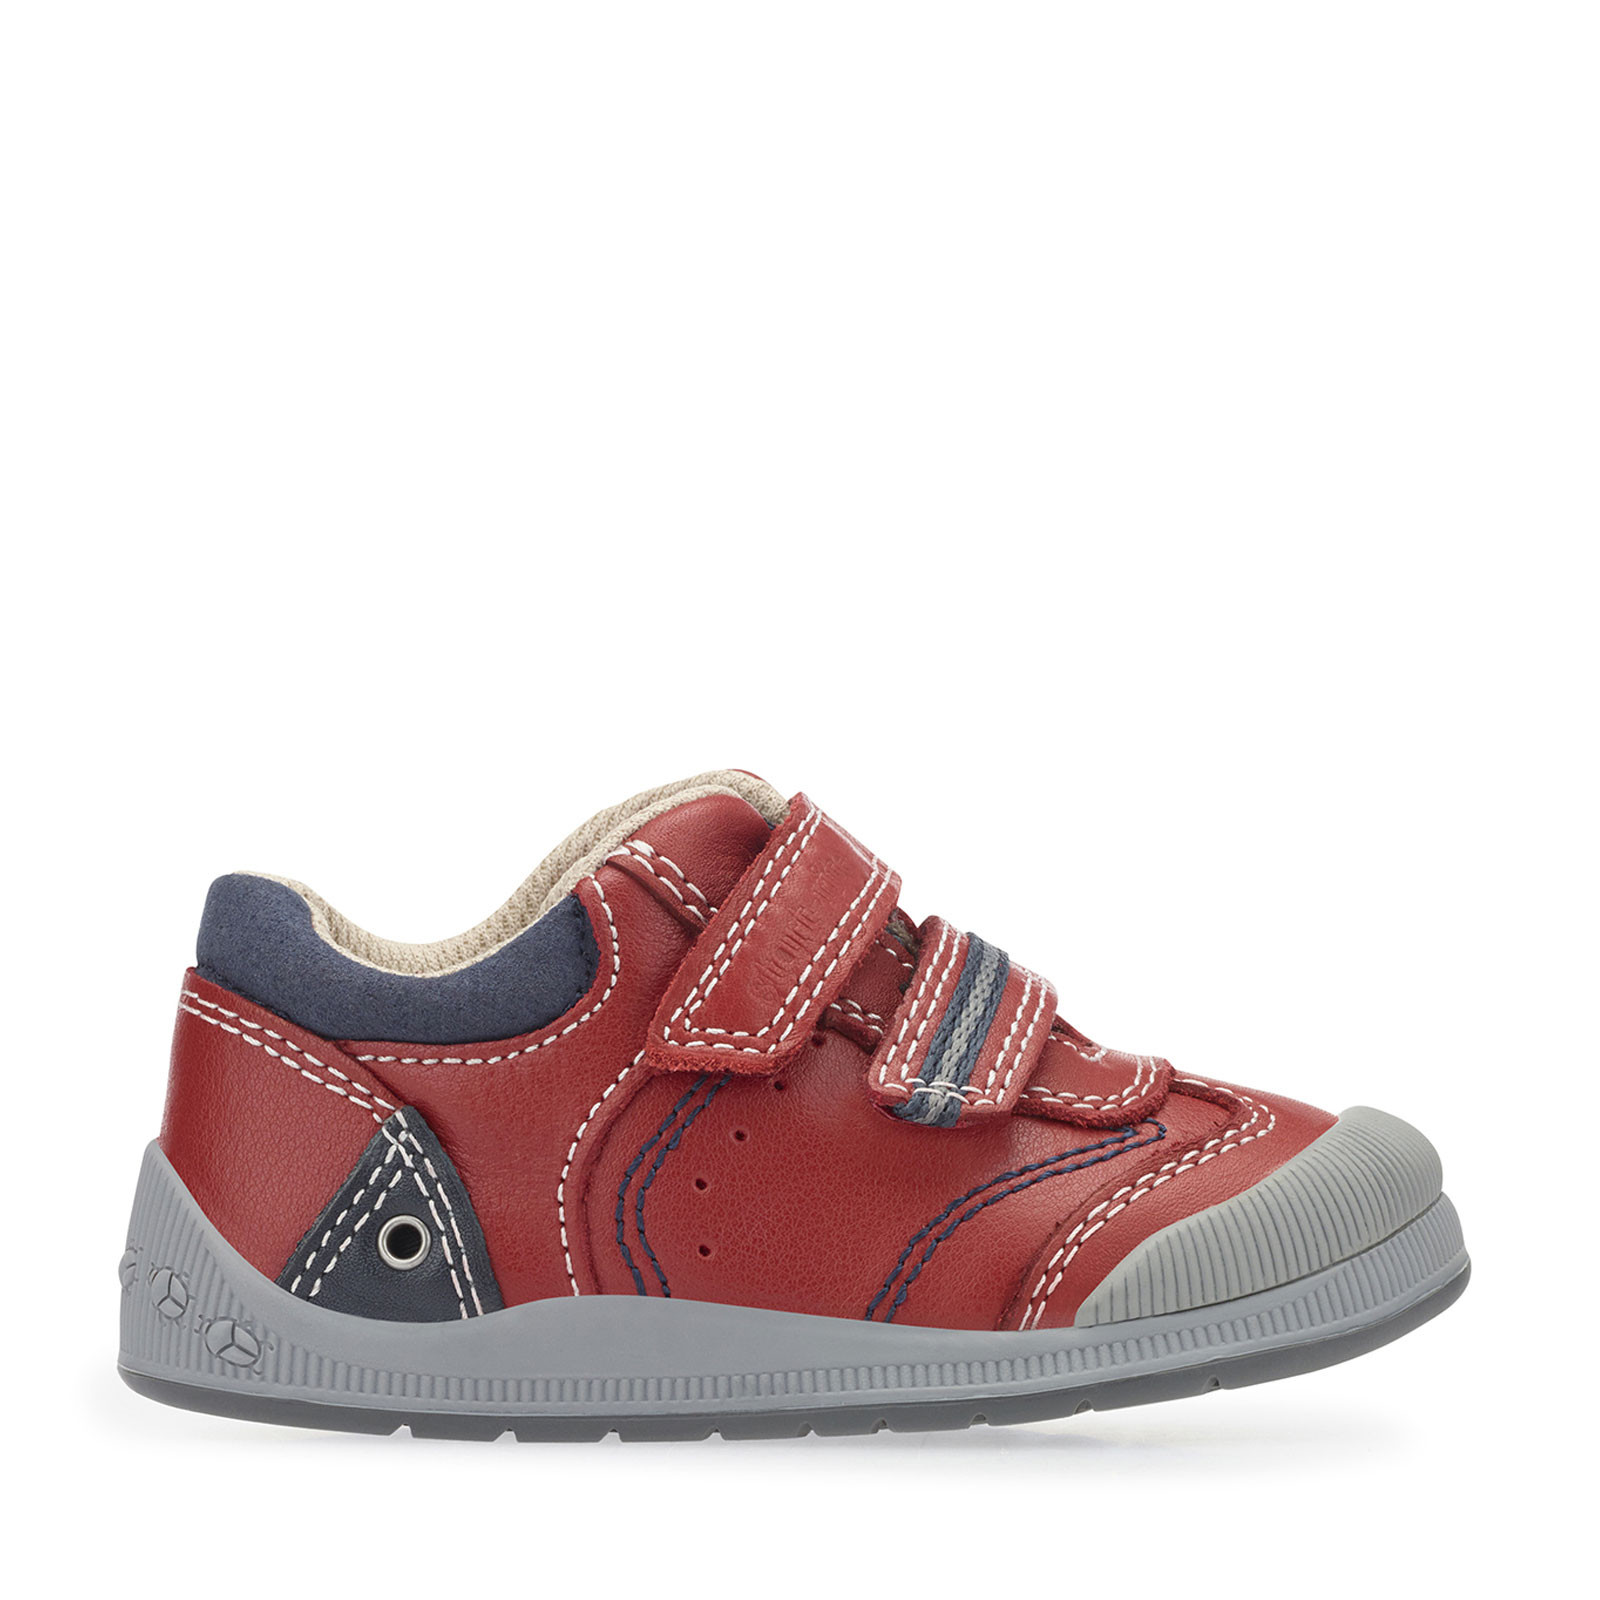 Boys Startrite 'Tough Bug' Fst Casual Shoes